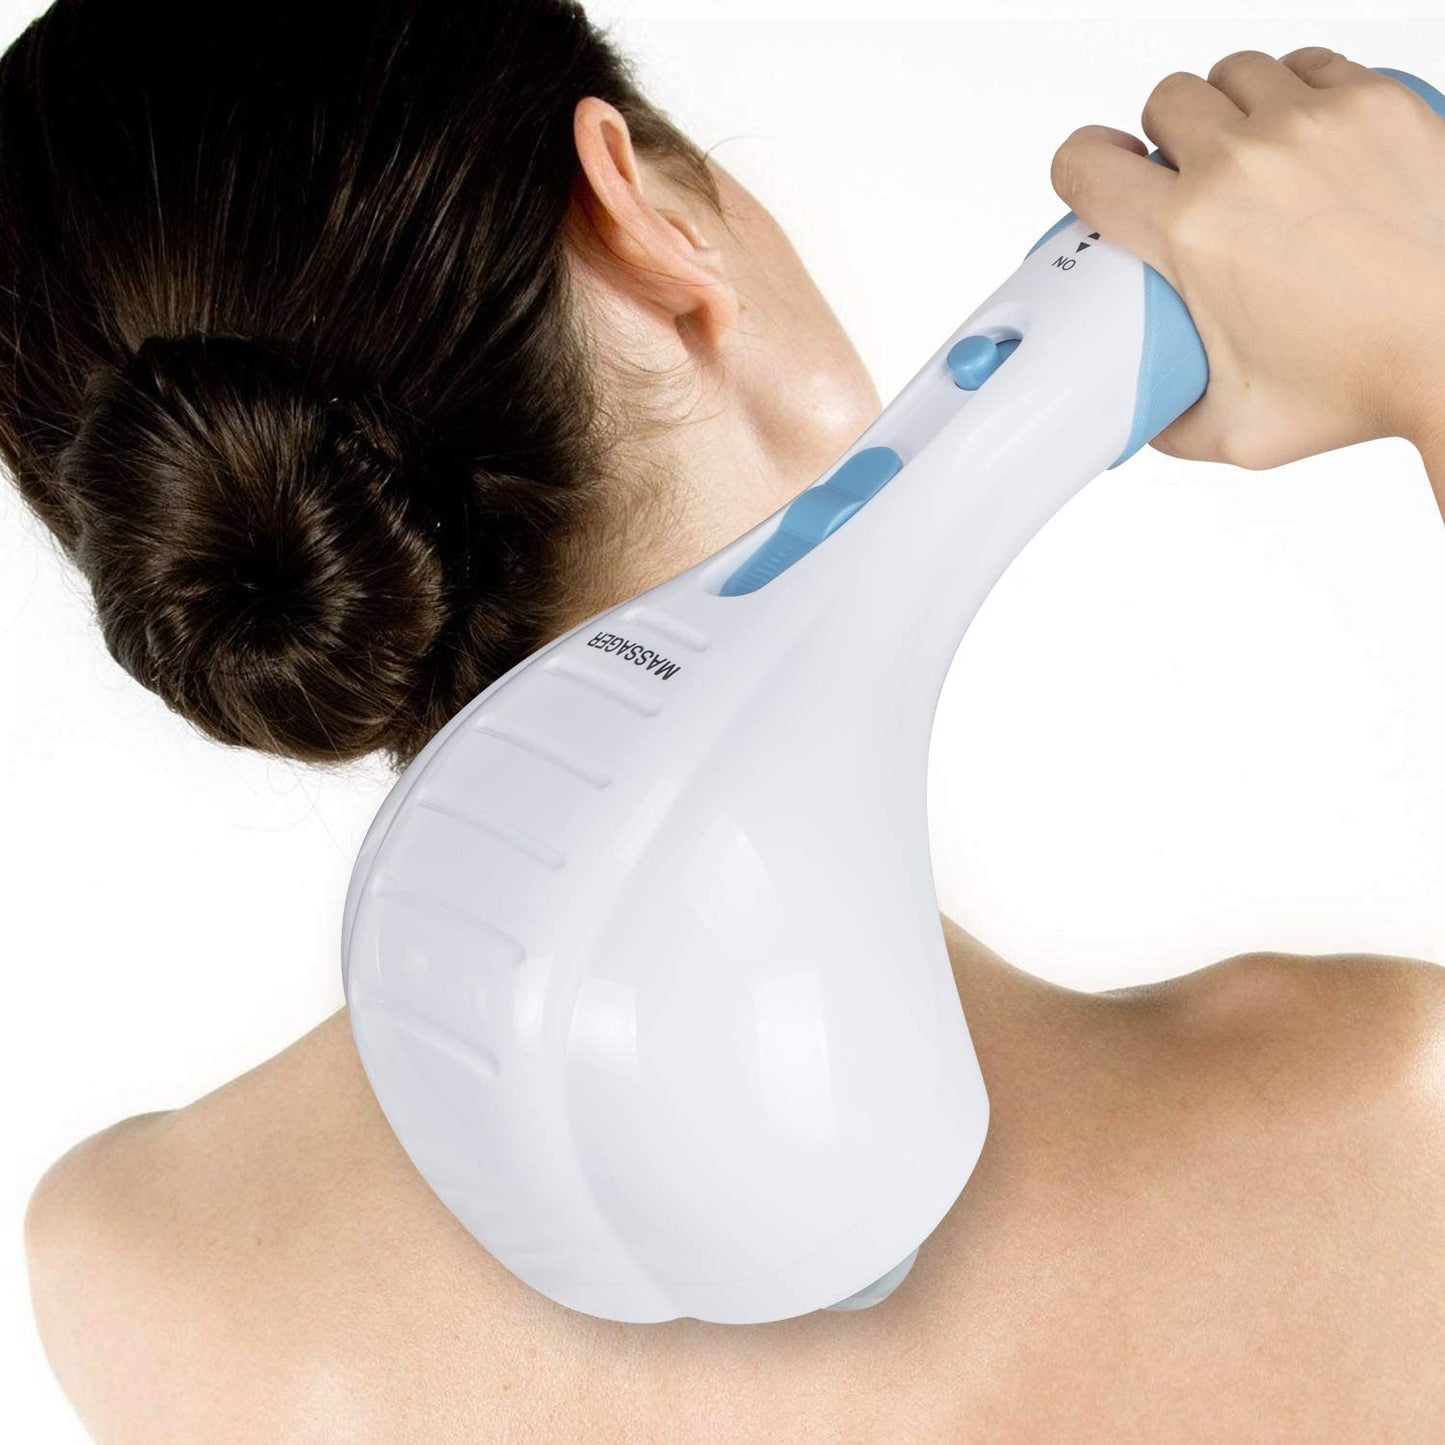 Cotsoco Handheld Neck Back Massager, Double Head Electric Full Body Massager, Deep Tissue Percussion Massage Hammer